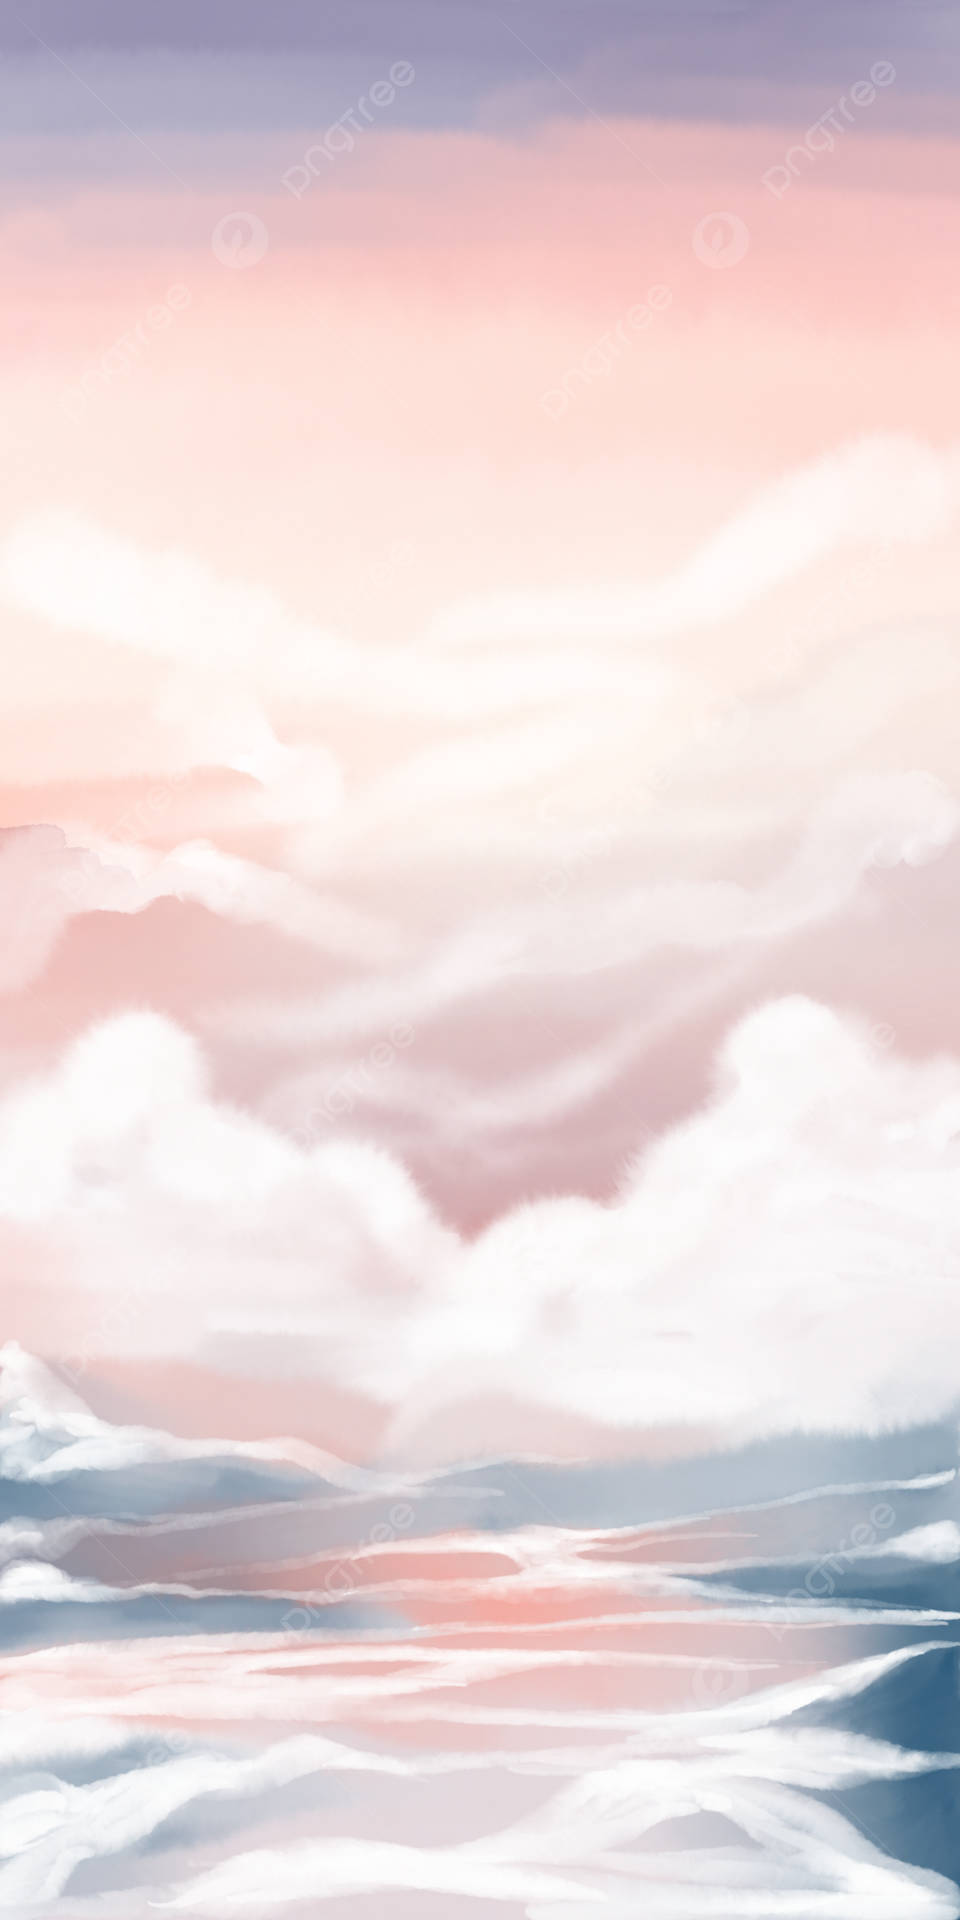 A Watercolor Painting Of Clouds And Water Wallpaper